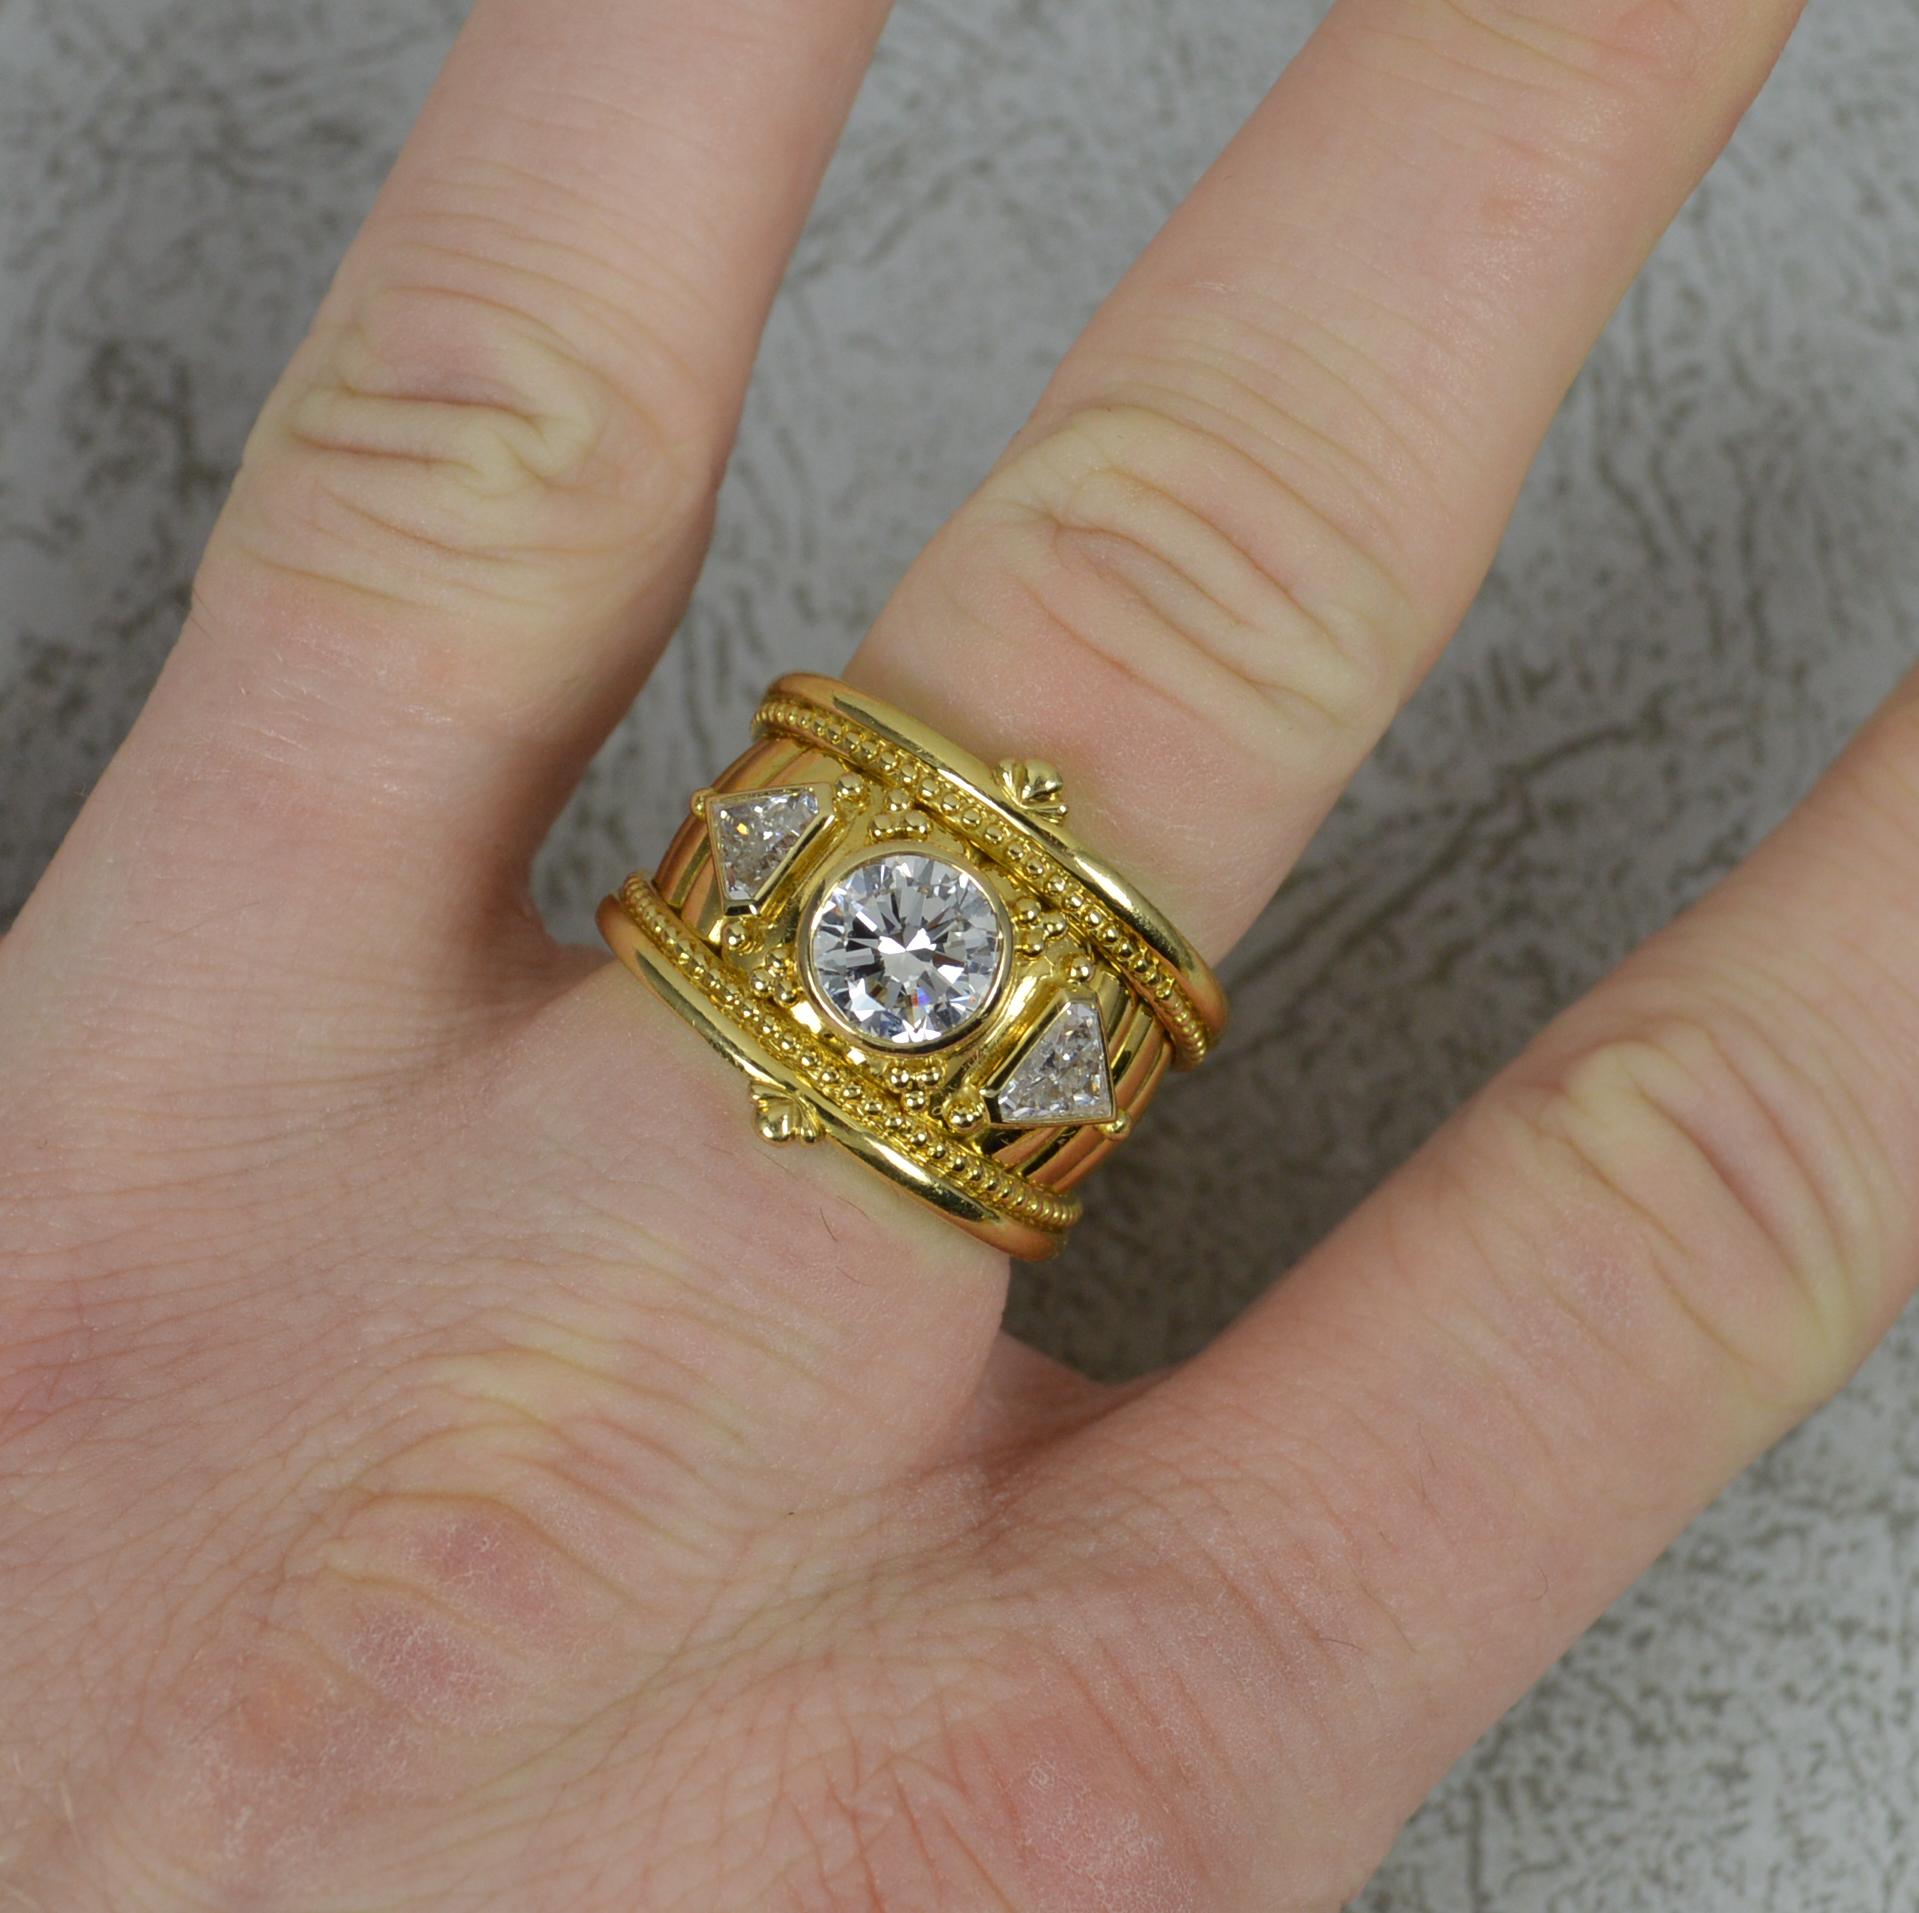 A superb 18ct gold and diamond ring by Theo Fennell.
18 carat yellow gold shank and bezel settings.
Designed with a round brilliant cut diamond to centre, 6.9mm diameter, 1.3 carats approx. Vs clarity, G-H colour. A well cut, very sparkly